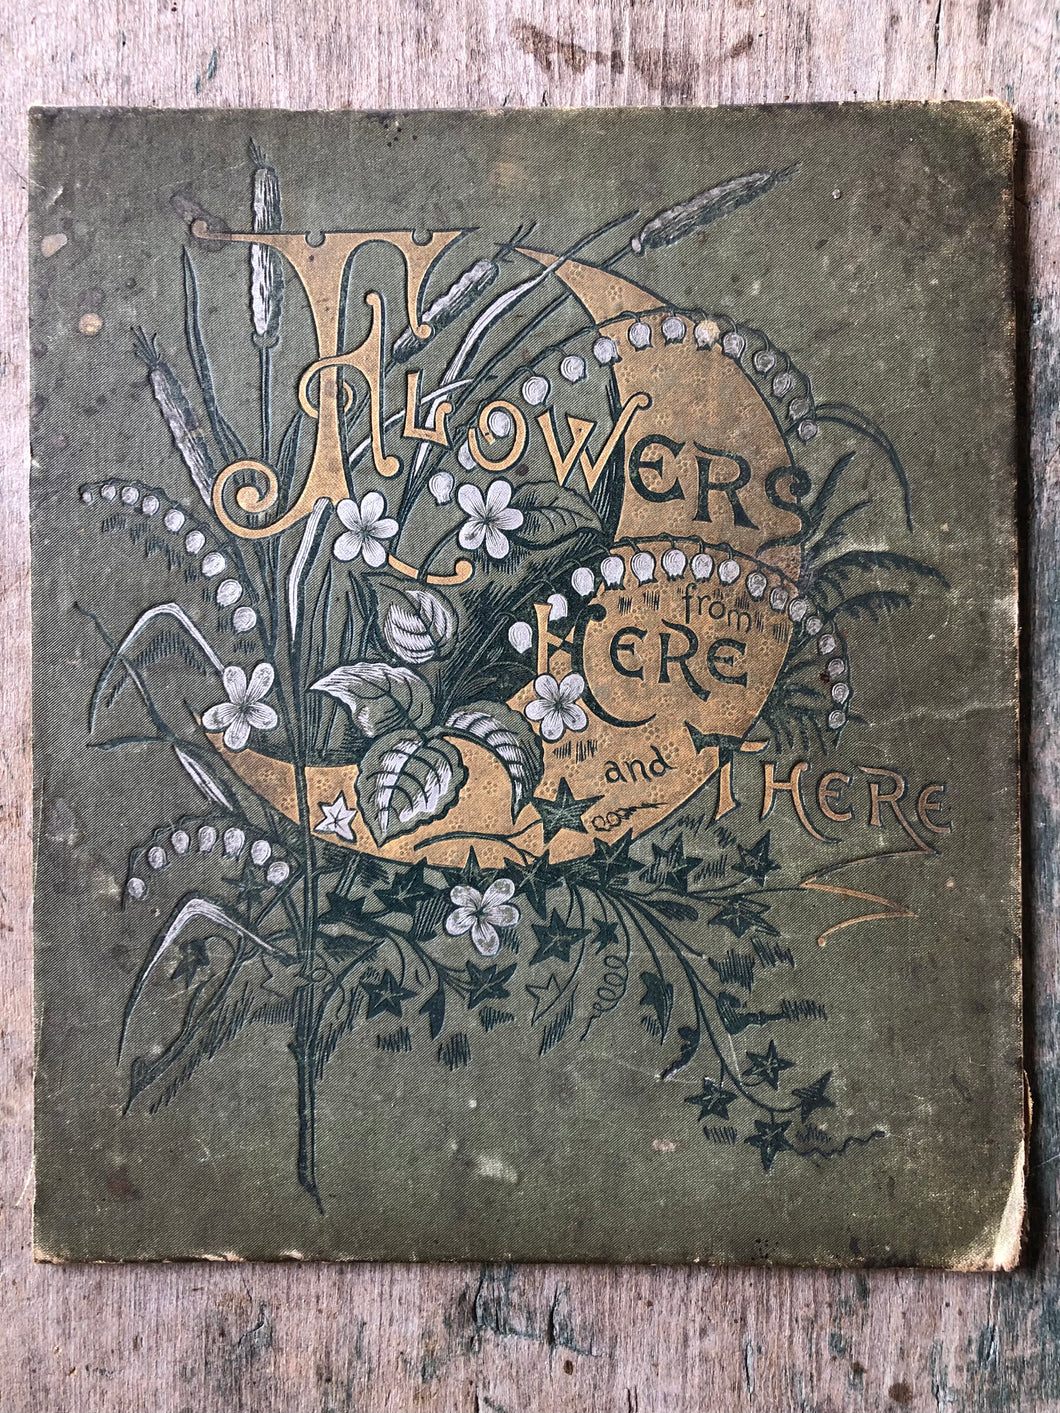 Cover of “Flowers from Here and There”